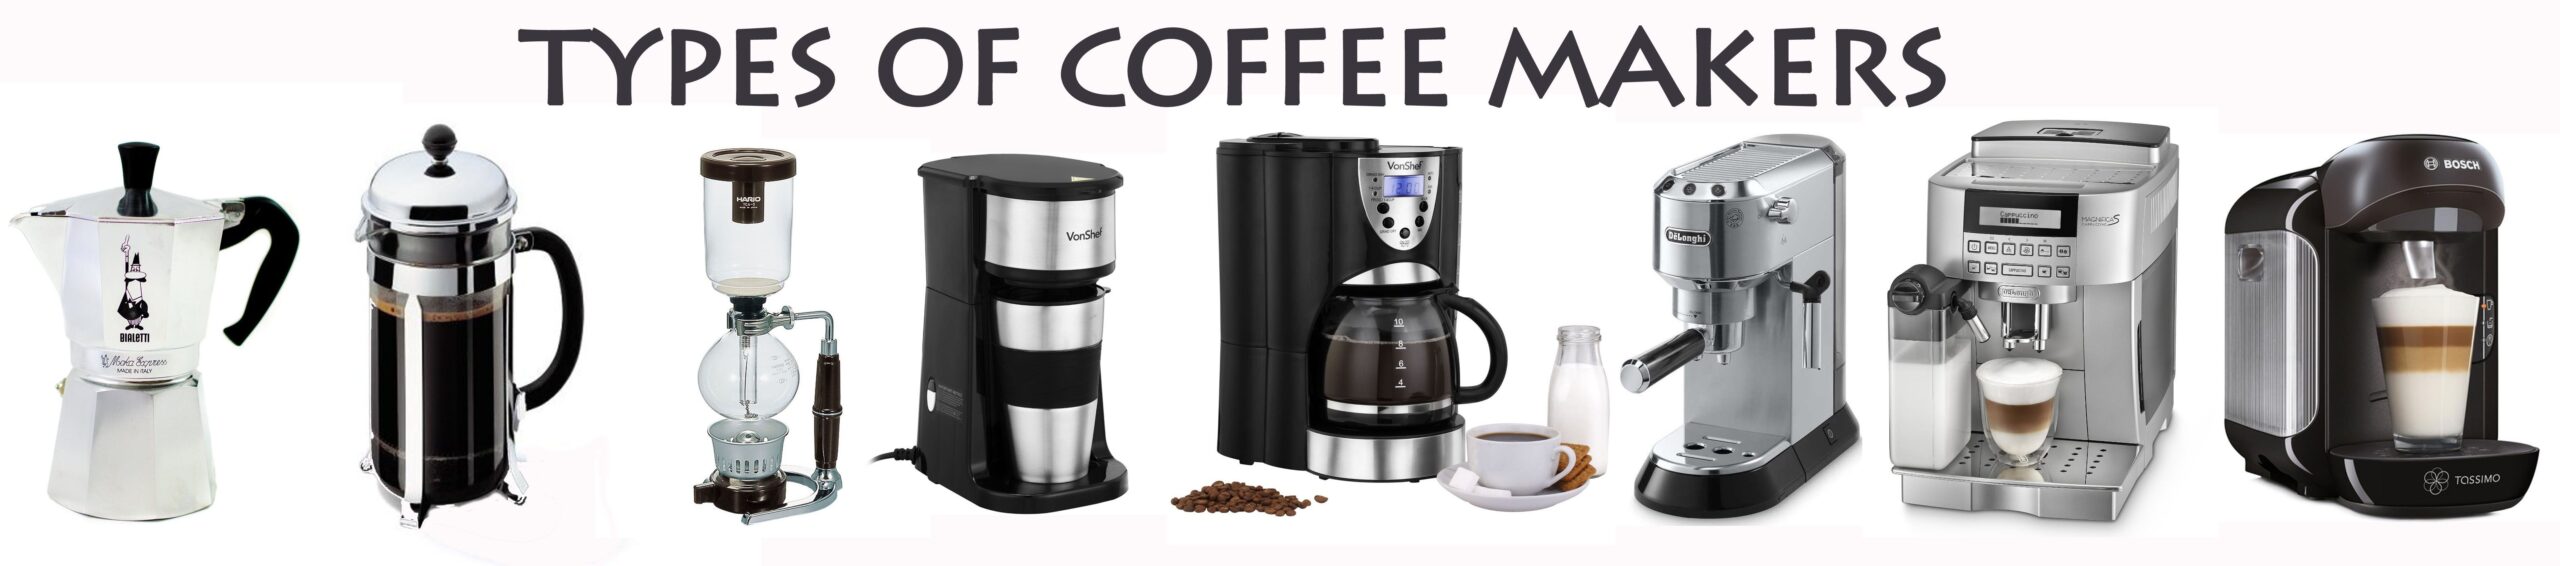 b"How to Clean & Use Coffee Makers & Types of Coffee Makers - Macys"